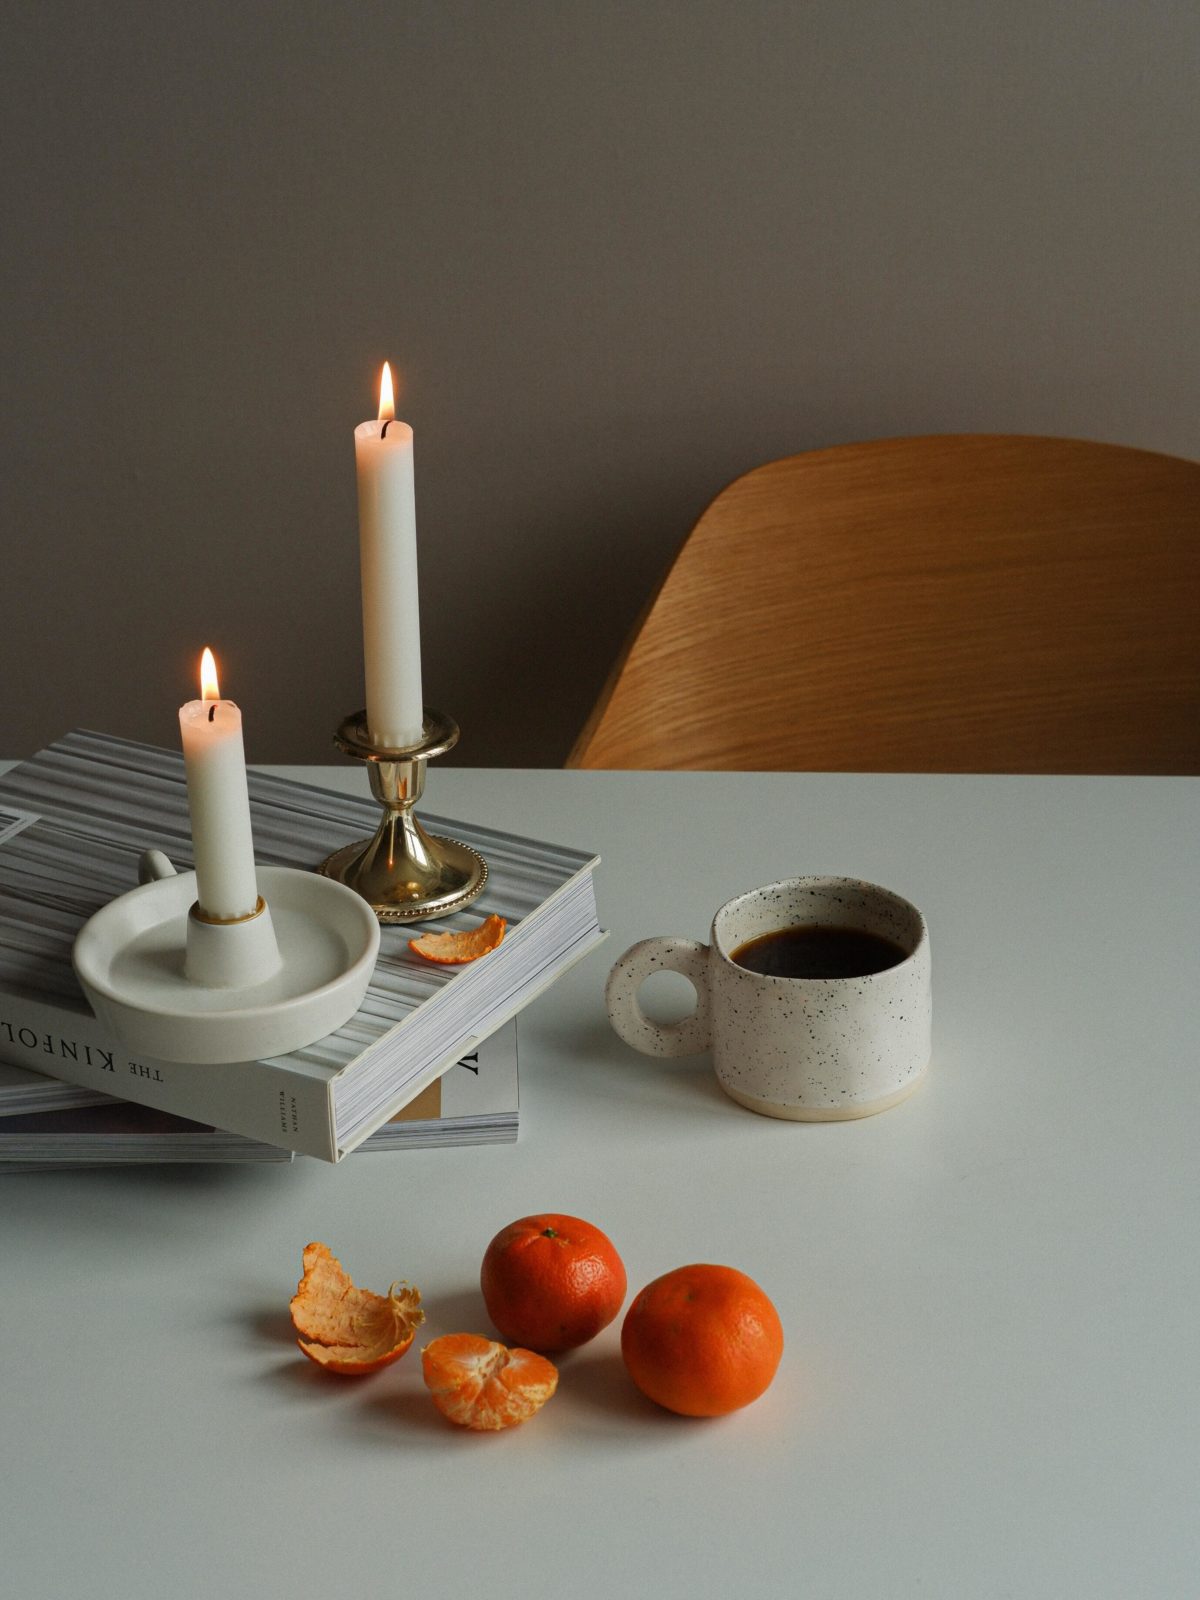 Taper candles lit on a white tabletop, with a cup of coffee and mandarin oranges.